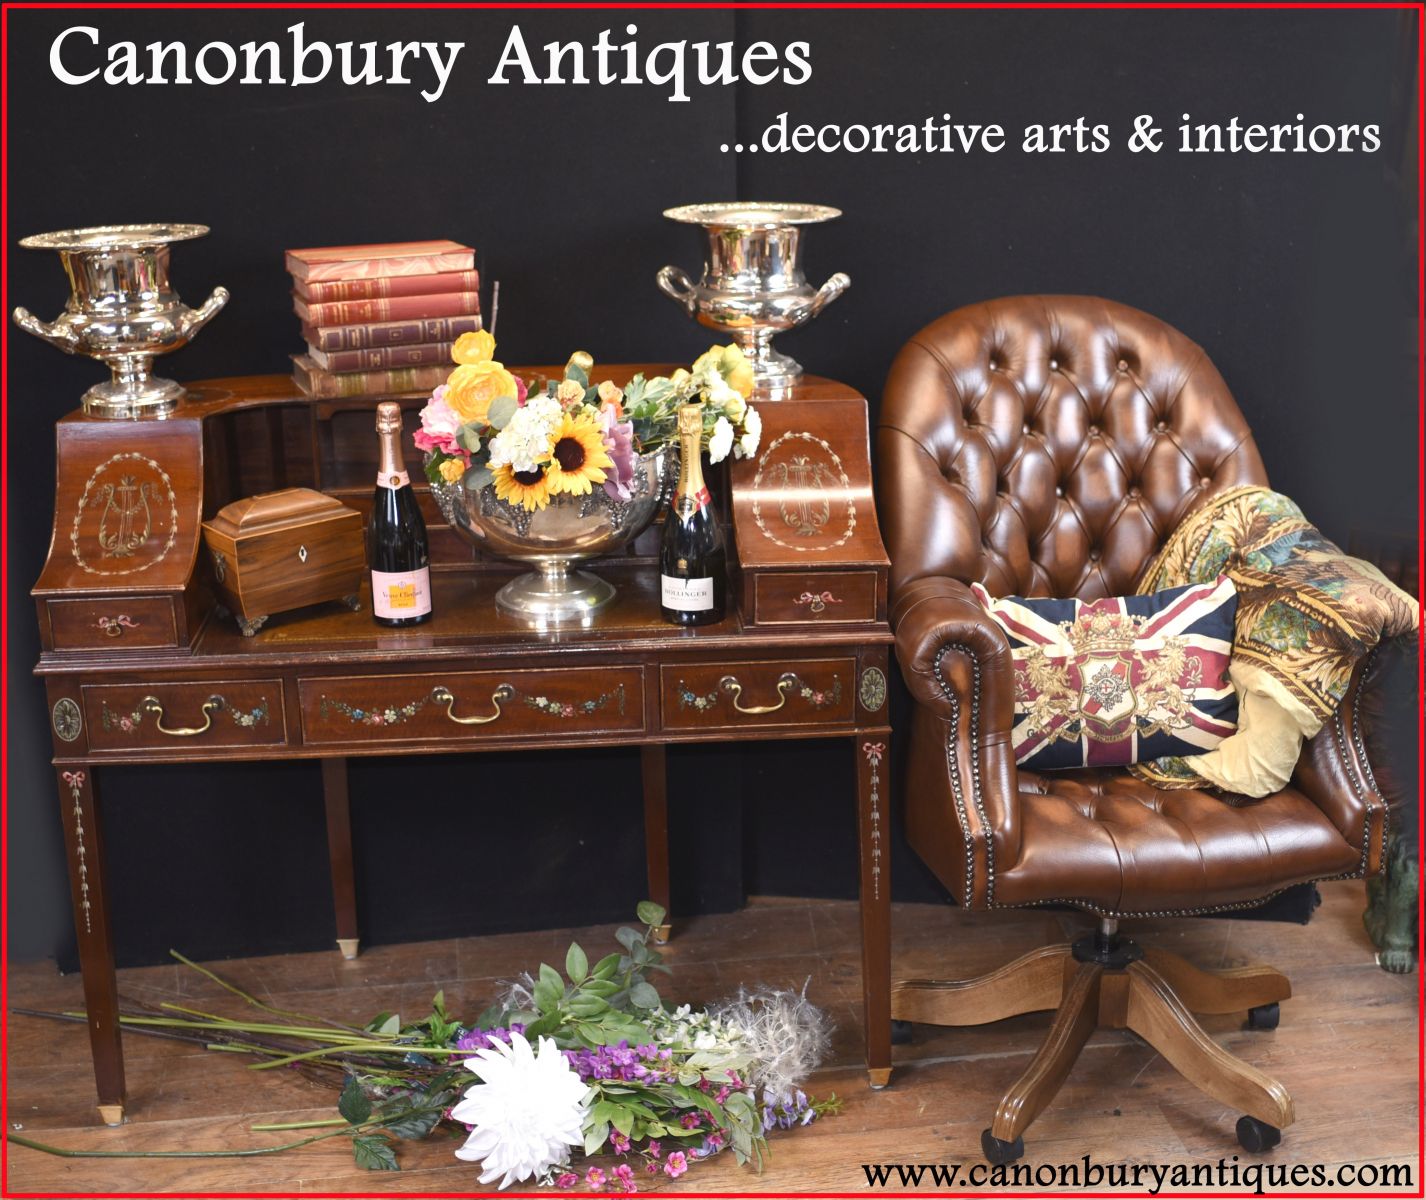 Nice things at Canonbury Antiques in Hertfordshire